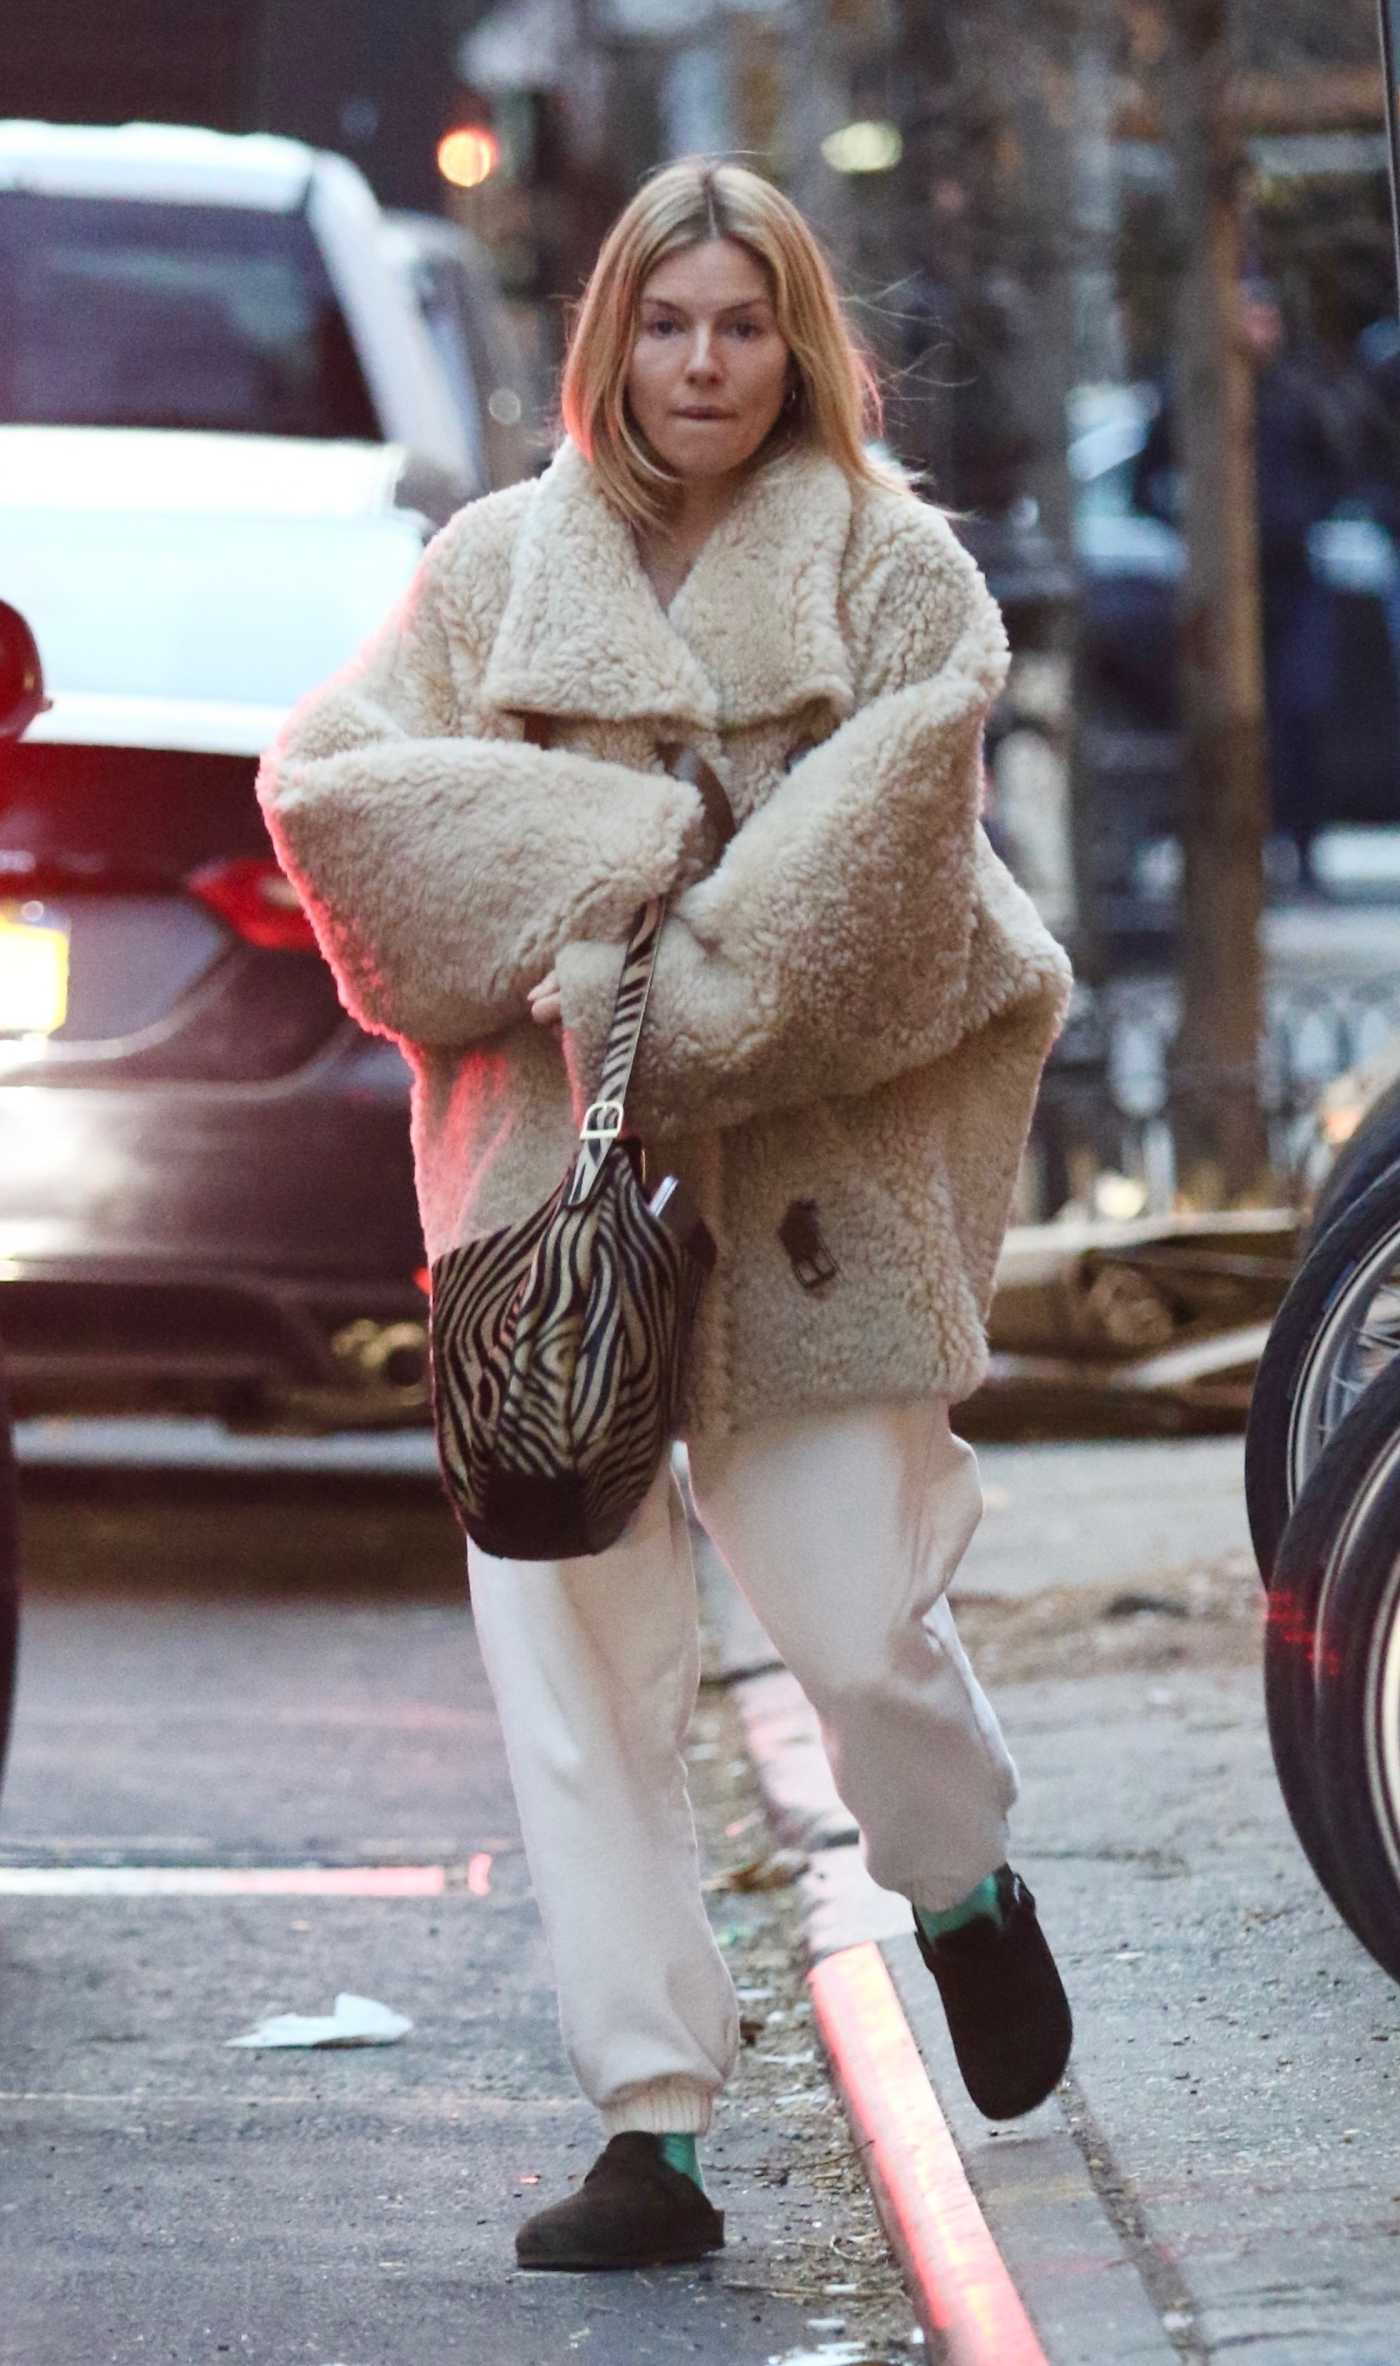 Sienna Miller in a White Sweatpants Leaves a Nail Salon in Manhattan’s SoHo Area in NYC 02/07/2023